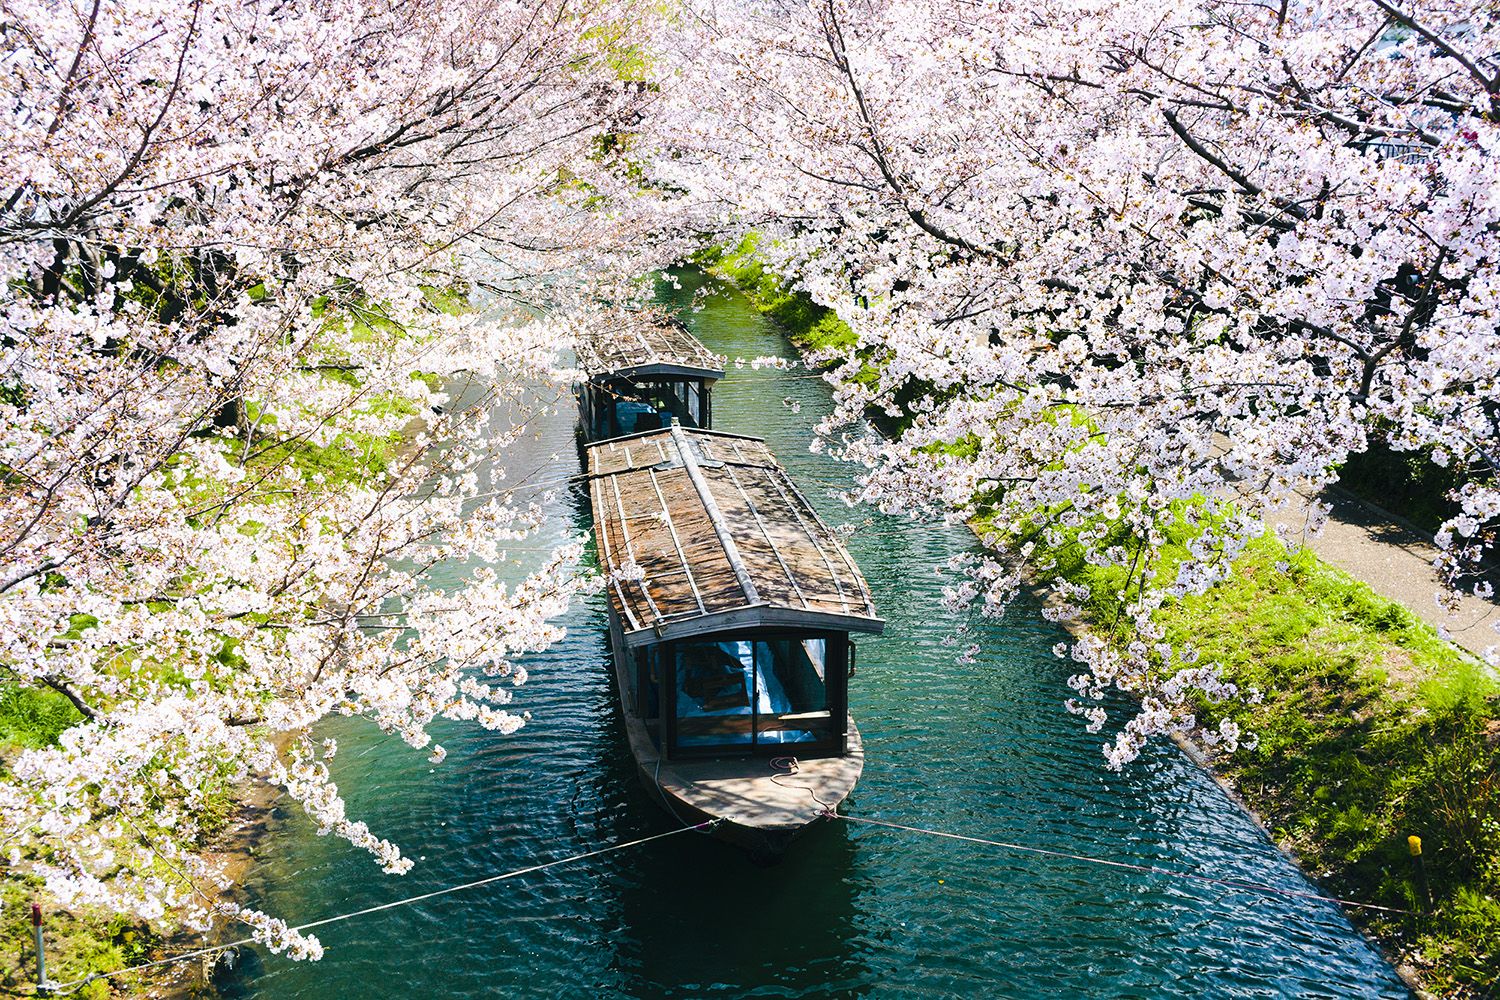 best places to visit in japan